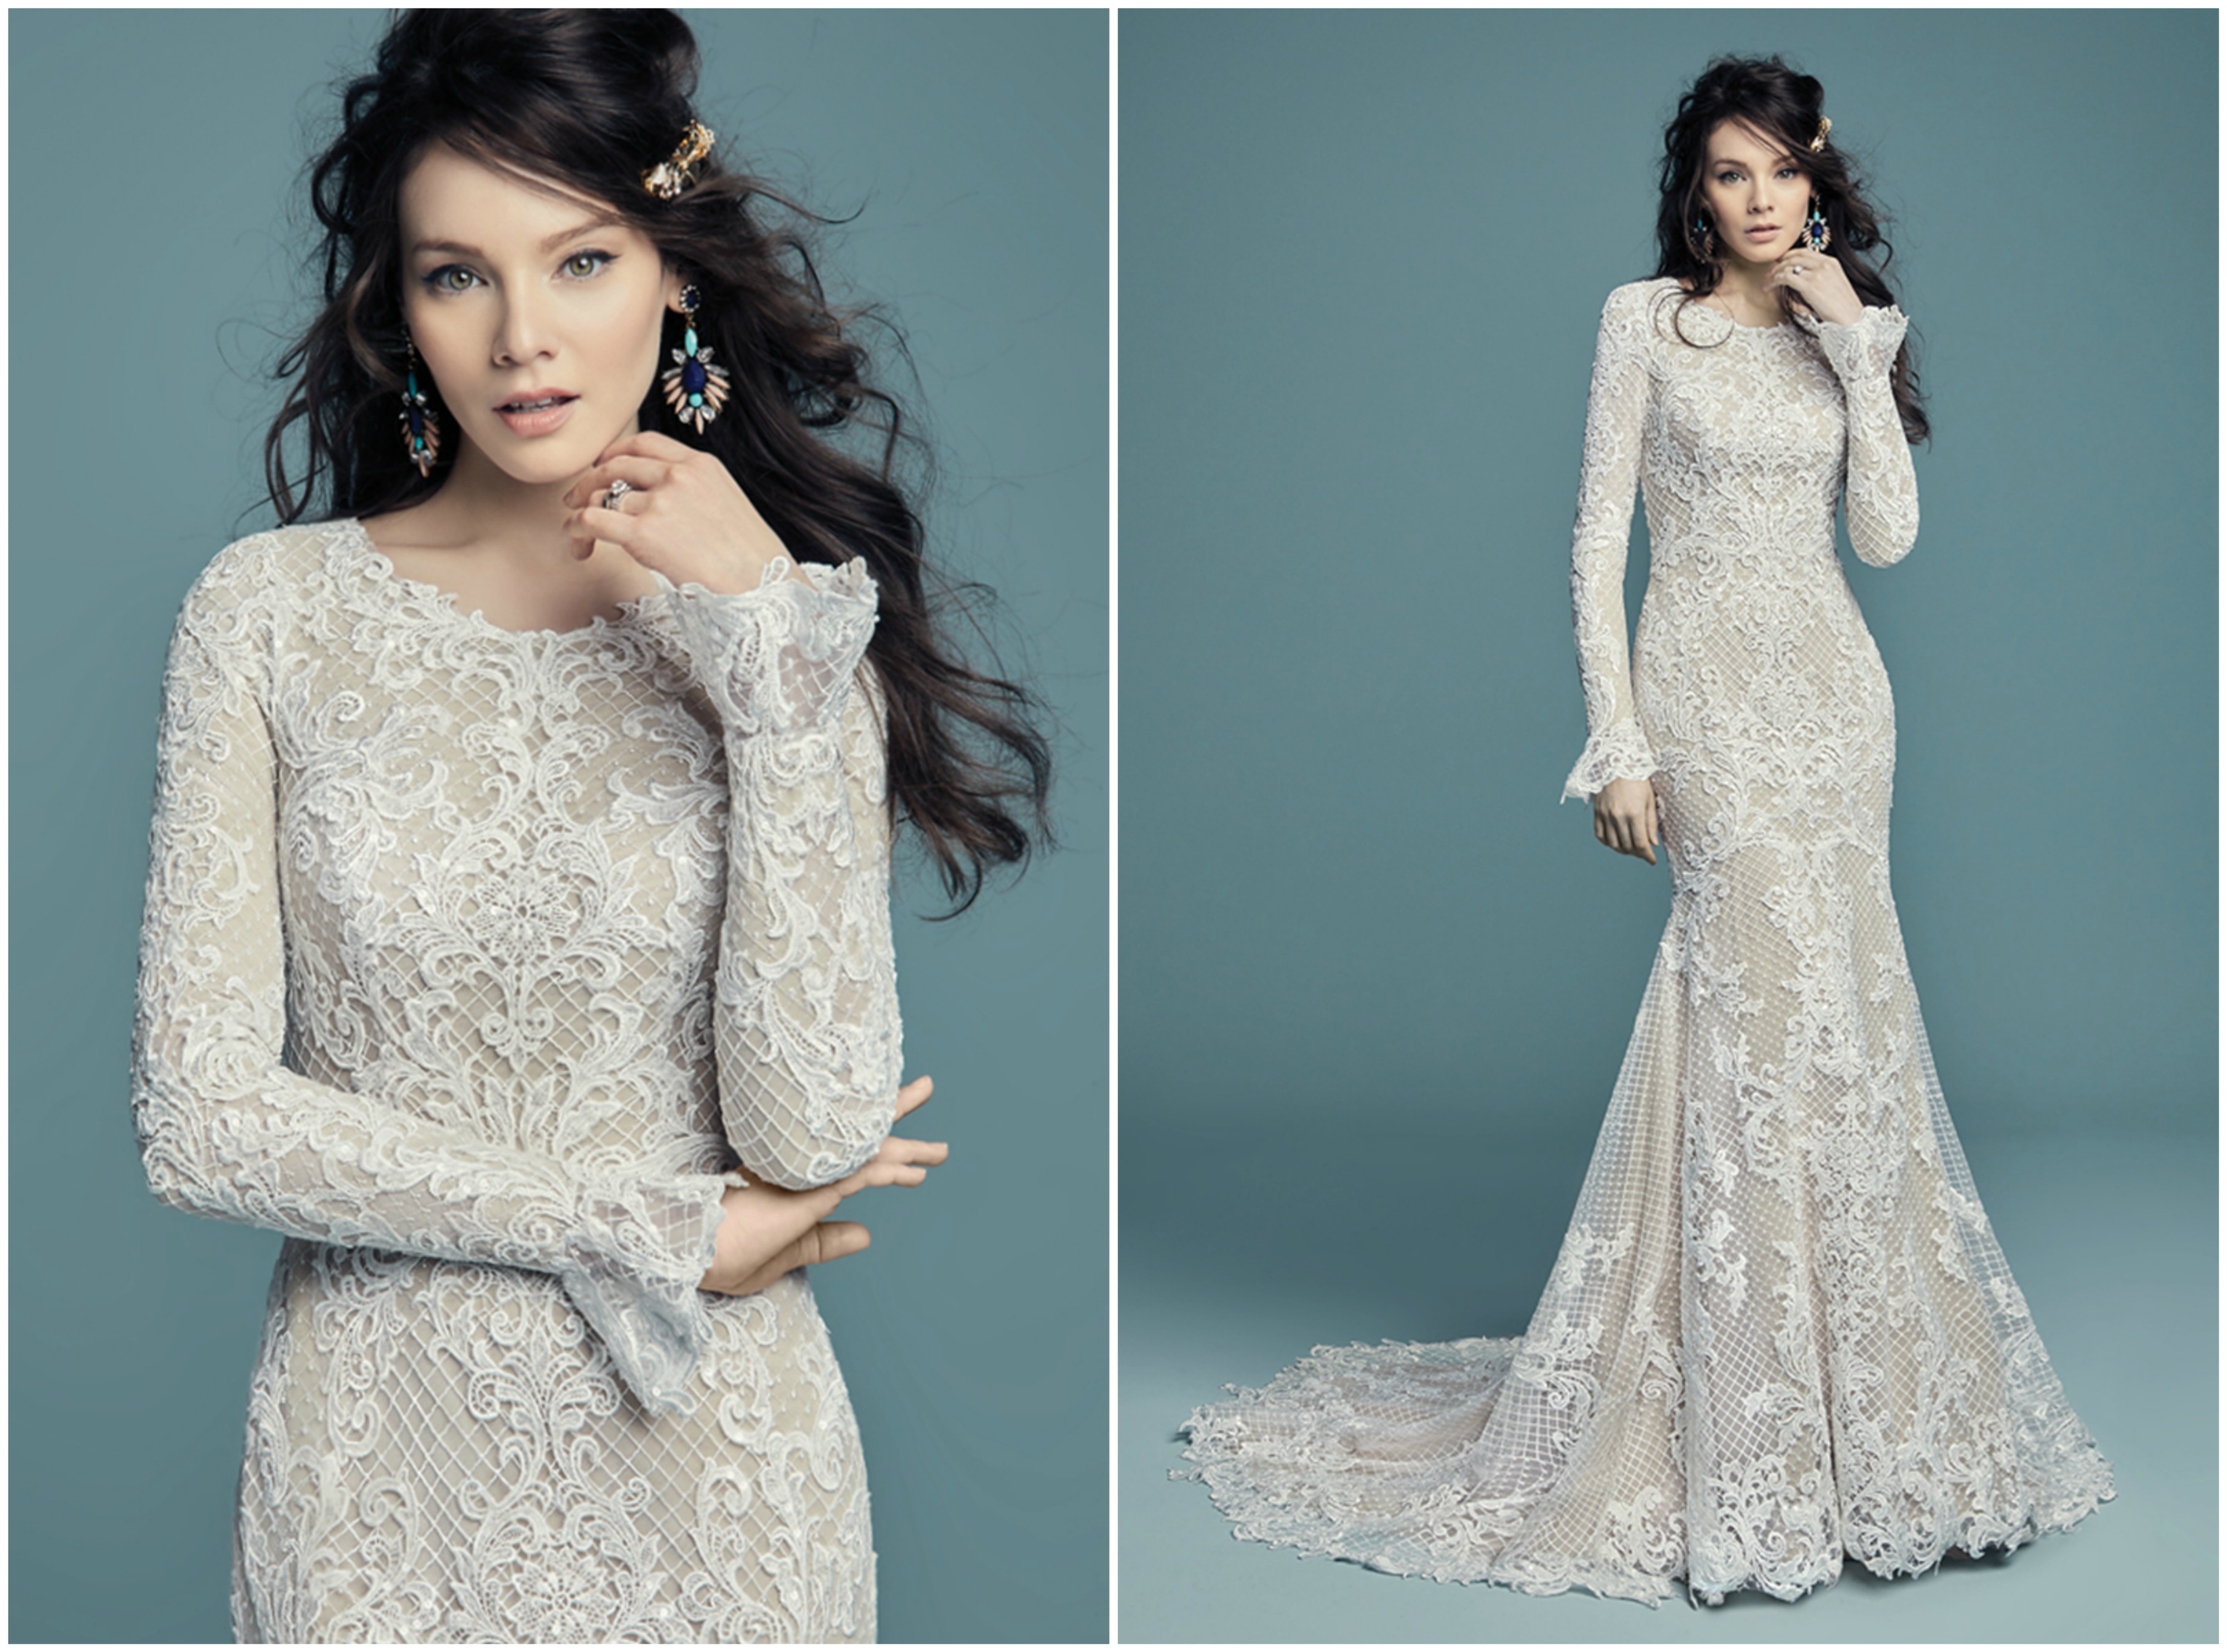 <a href="https://www.maggiesottero.com/maggie-sottero/hailey-lynette/11482" target="_blank">Maggie Sottero</a>